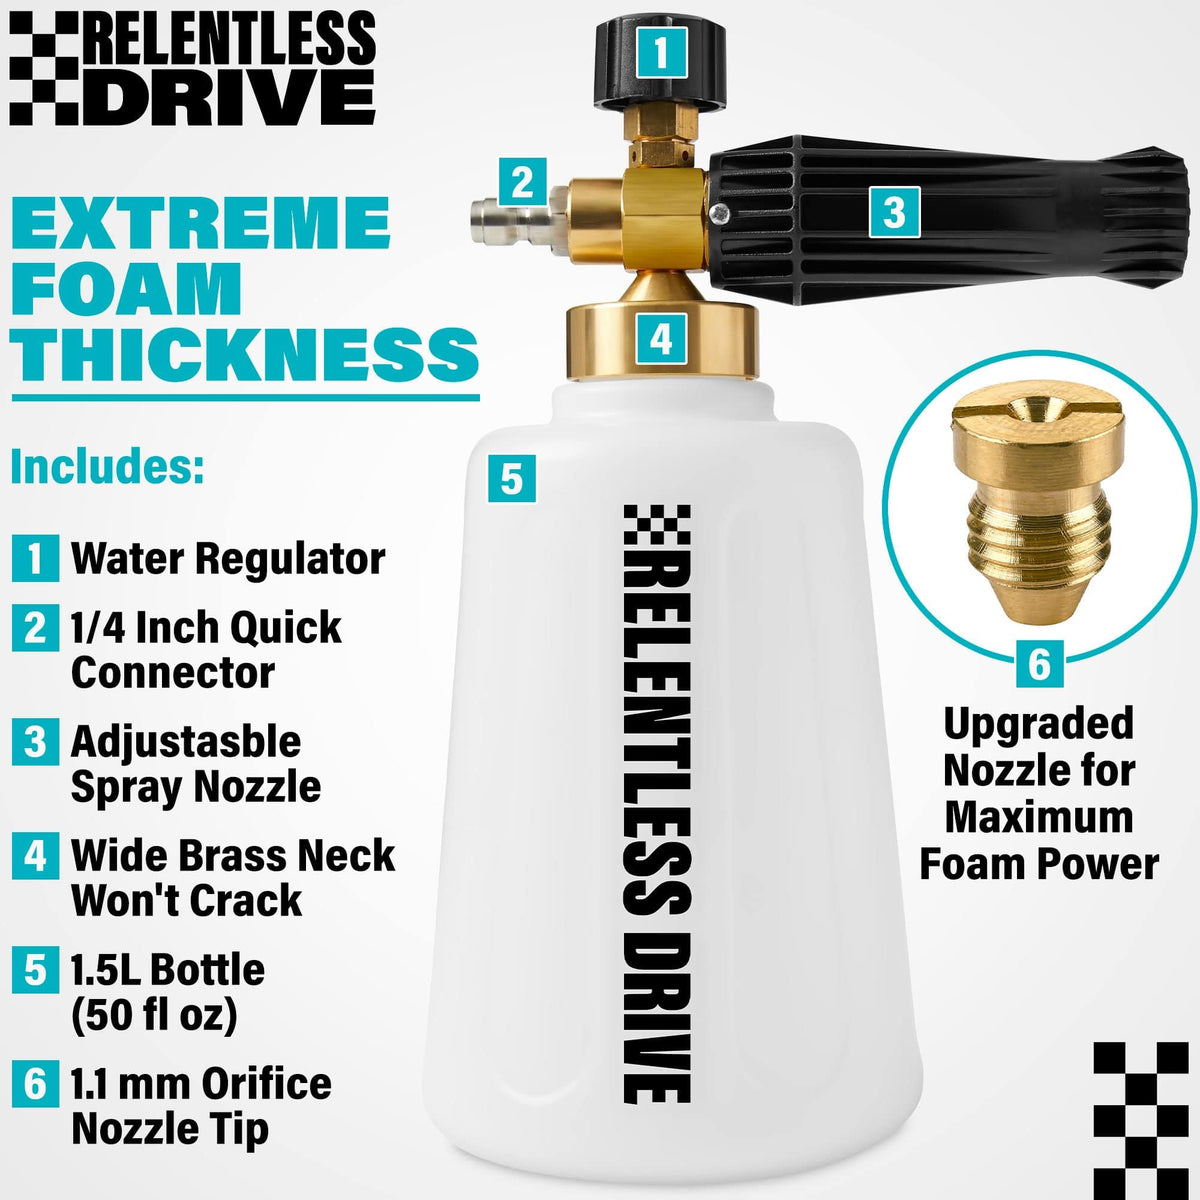 Limitless Car Care® Extreme Release Pressure Foam Cannon